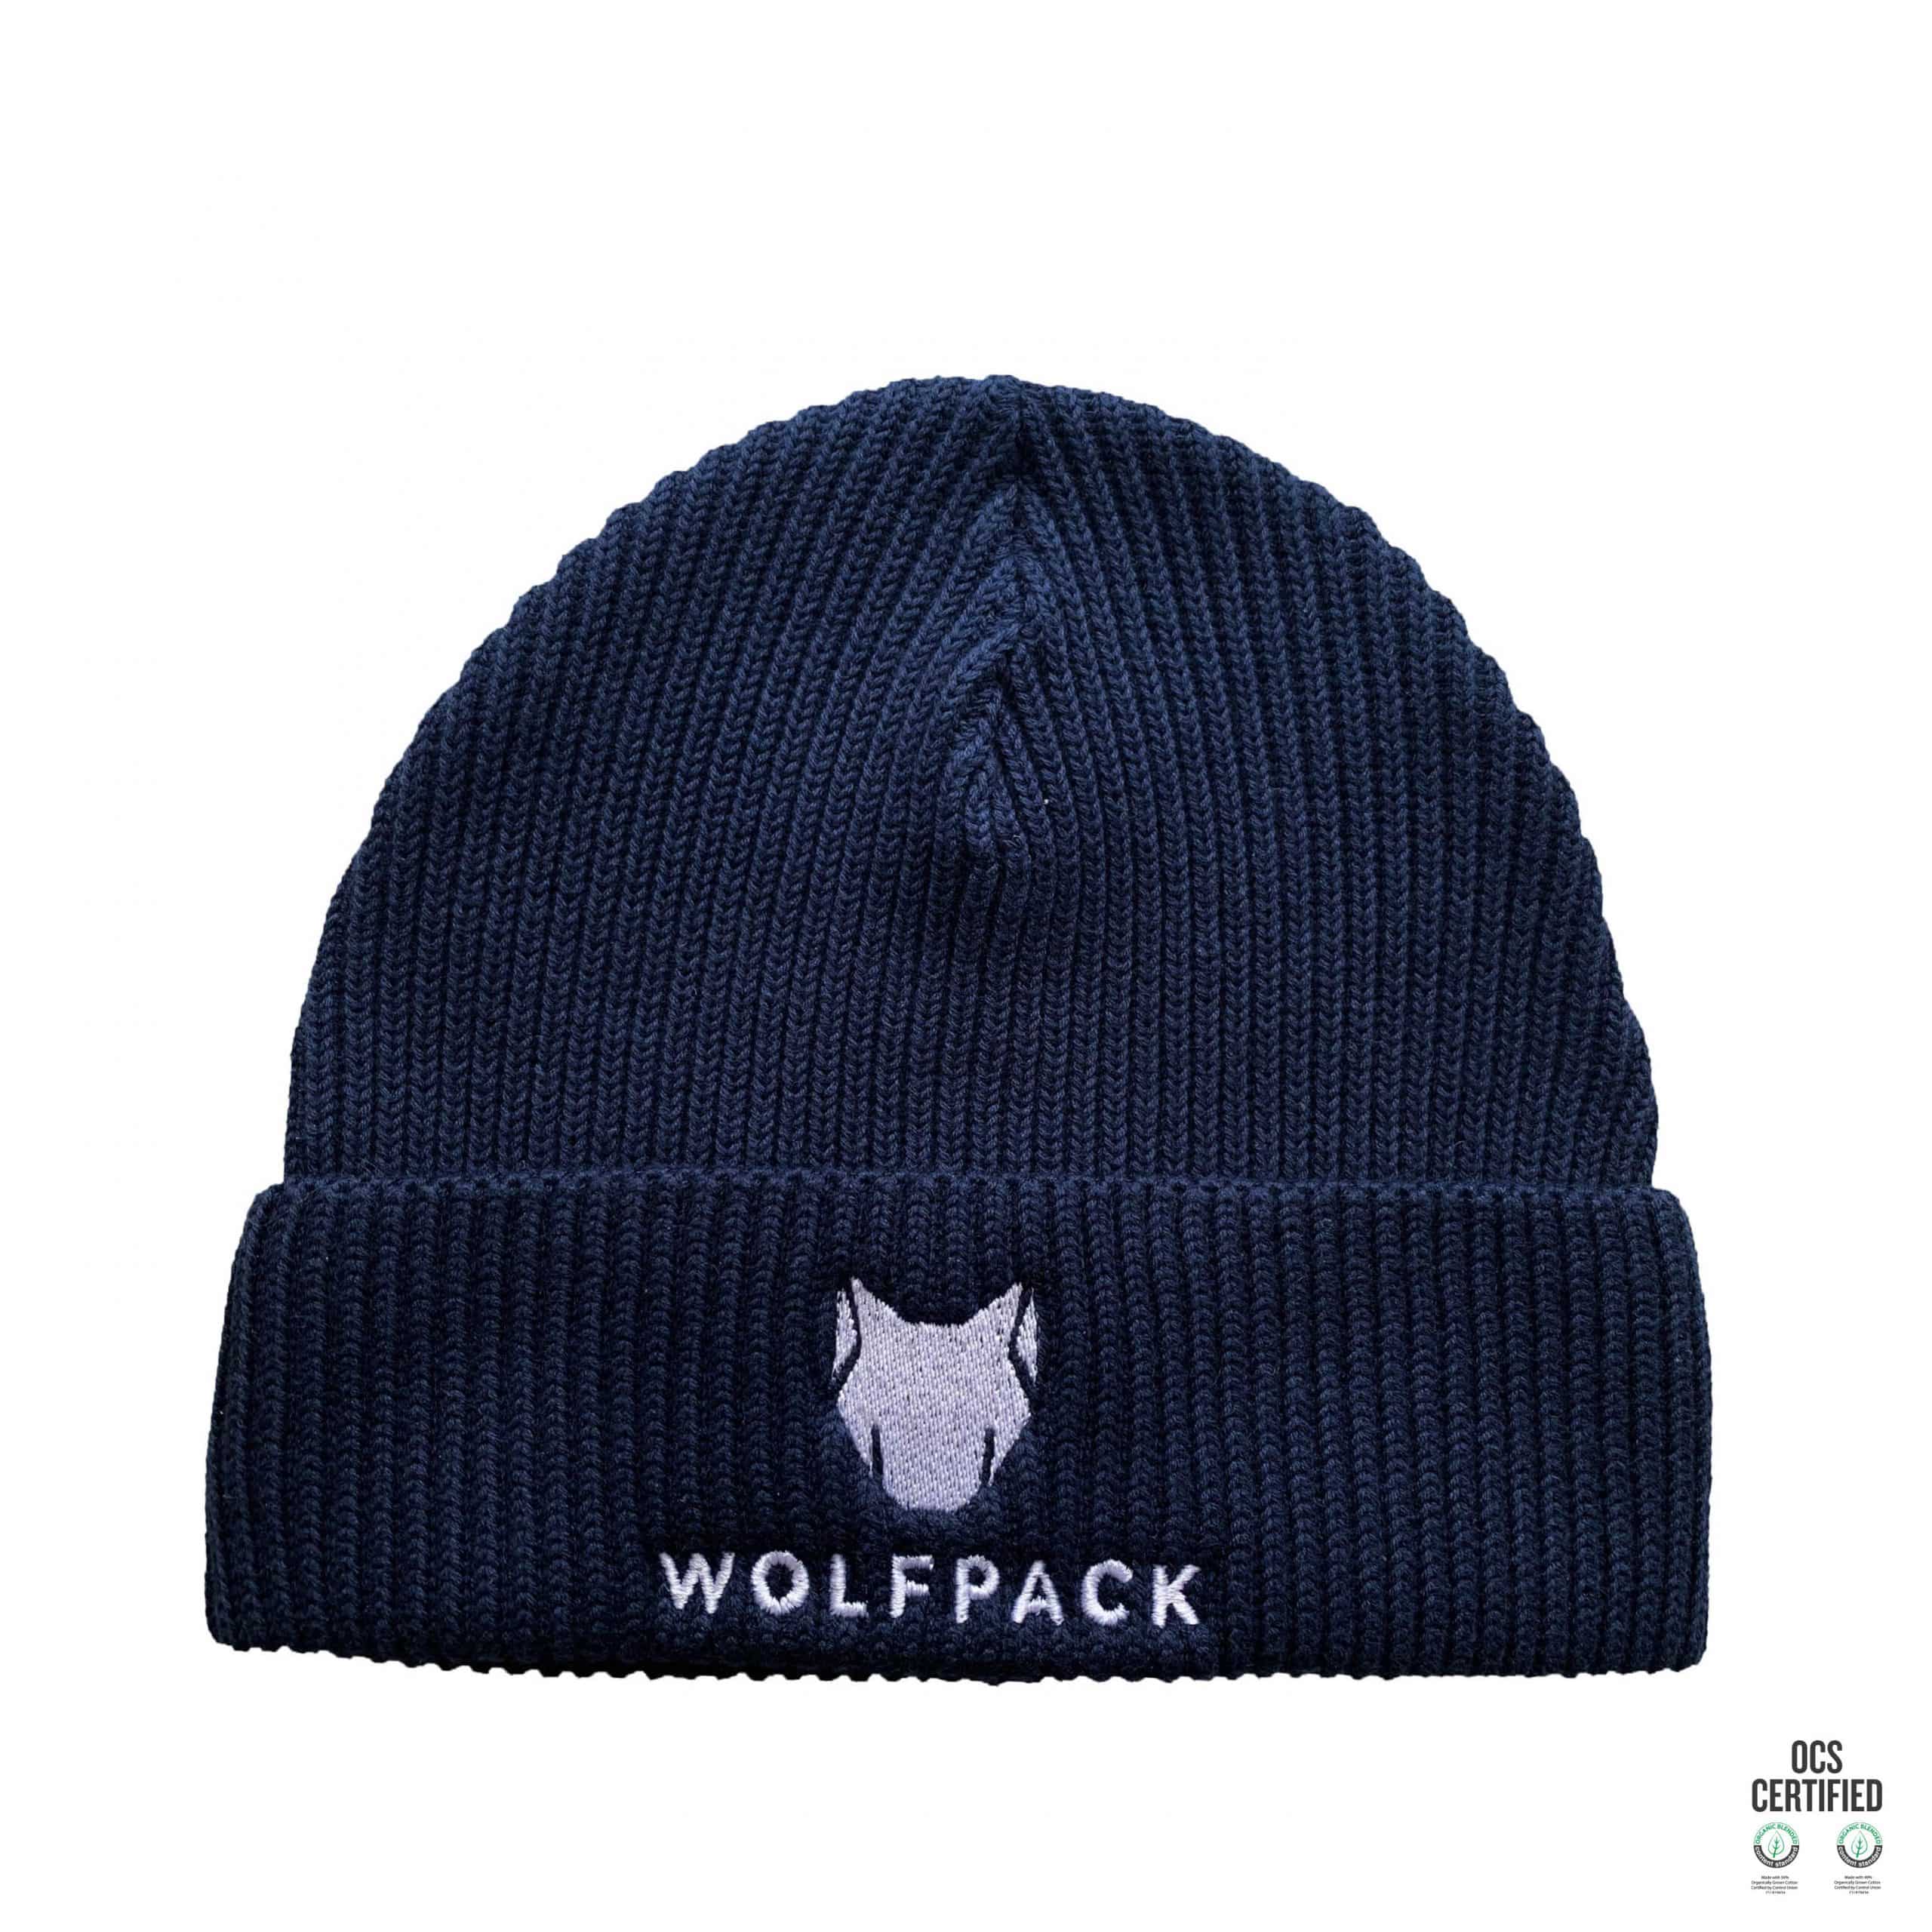 The Wolfpack embroidered Beanie, French Navy